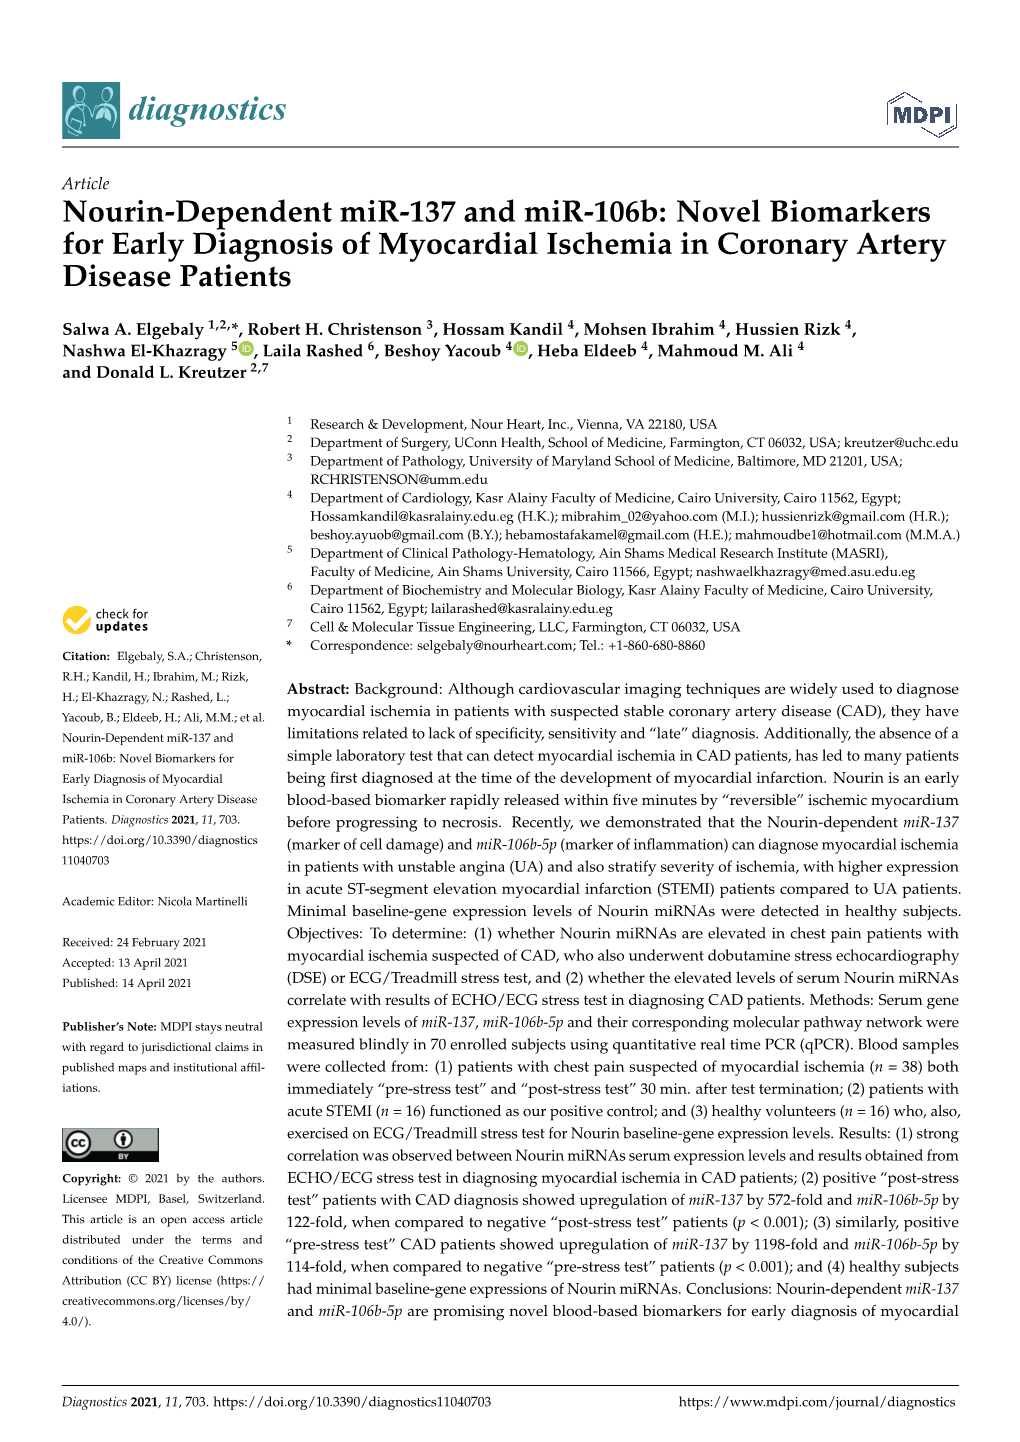 Novel Biomarkers for Early Diagnosis of Myocardial Ischemia in Coronary Artery Disease Patients